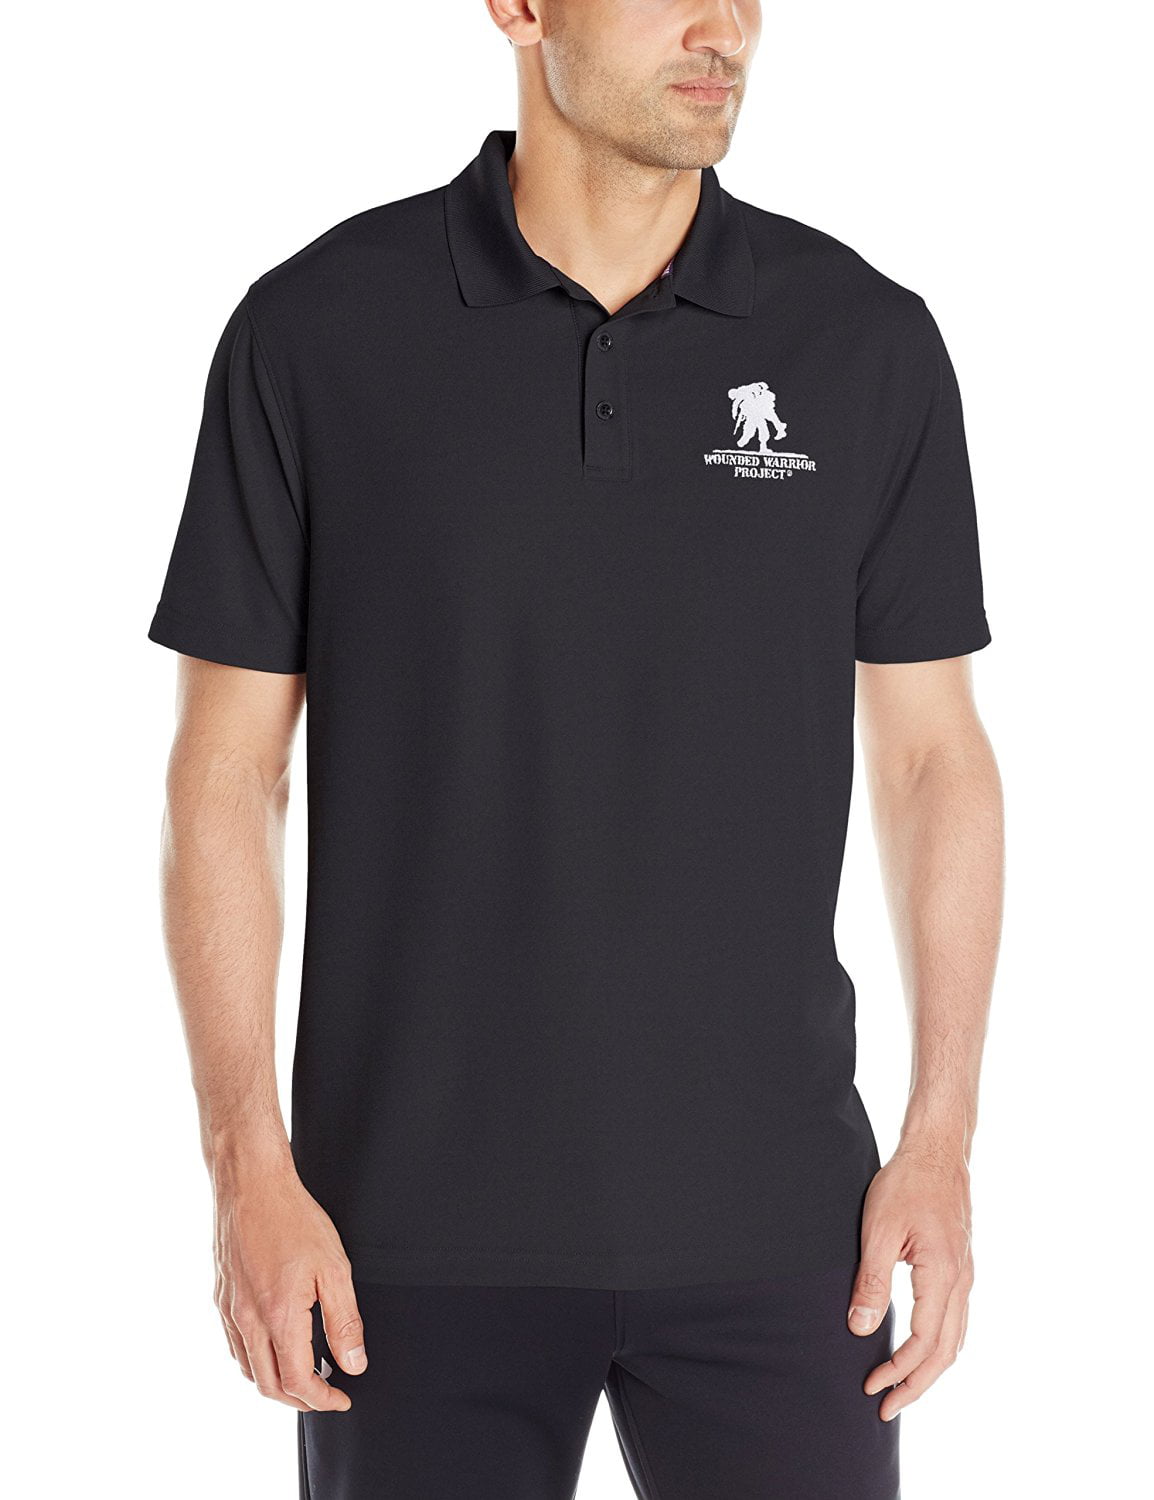 under armour wounded warrior polo